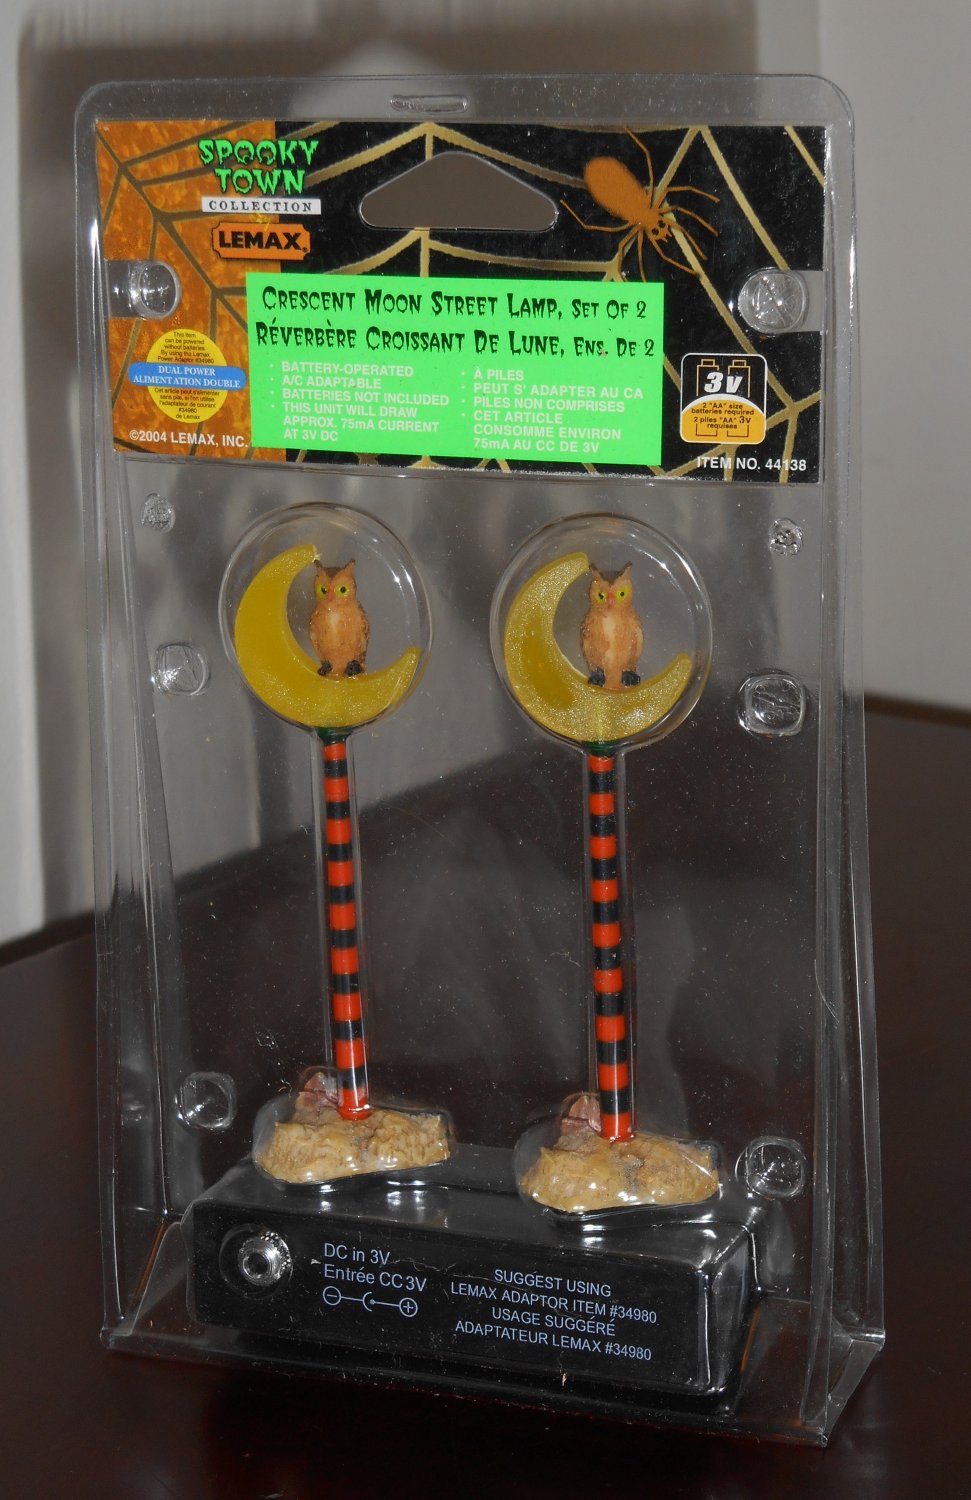 Crescent Moon Street Lamp Set of 2 Lemax 44138 Spooky Town Collection Battery Operated Halloween